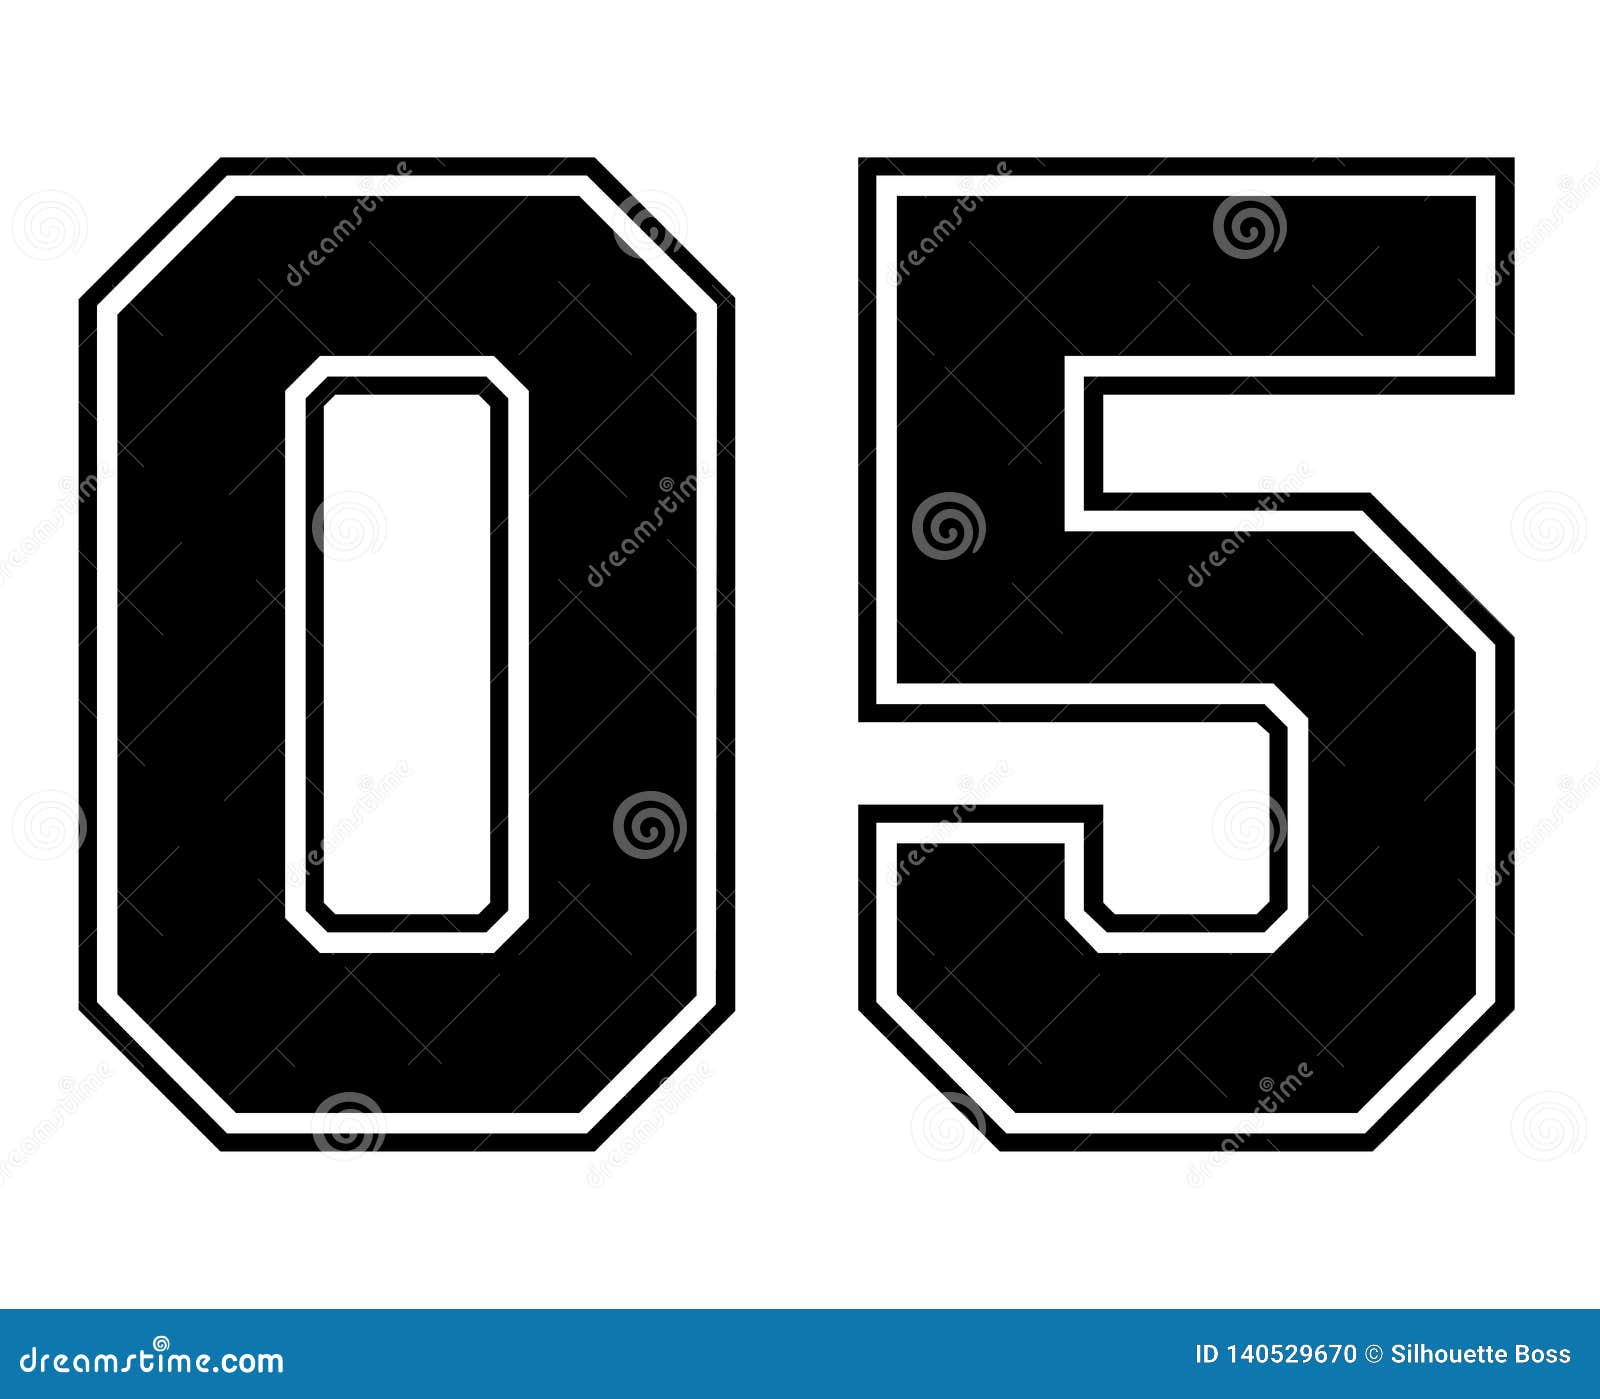 05 Classic Vintage Sport Jersey Number in Black Number on White